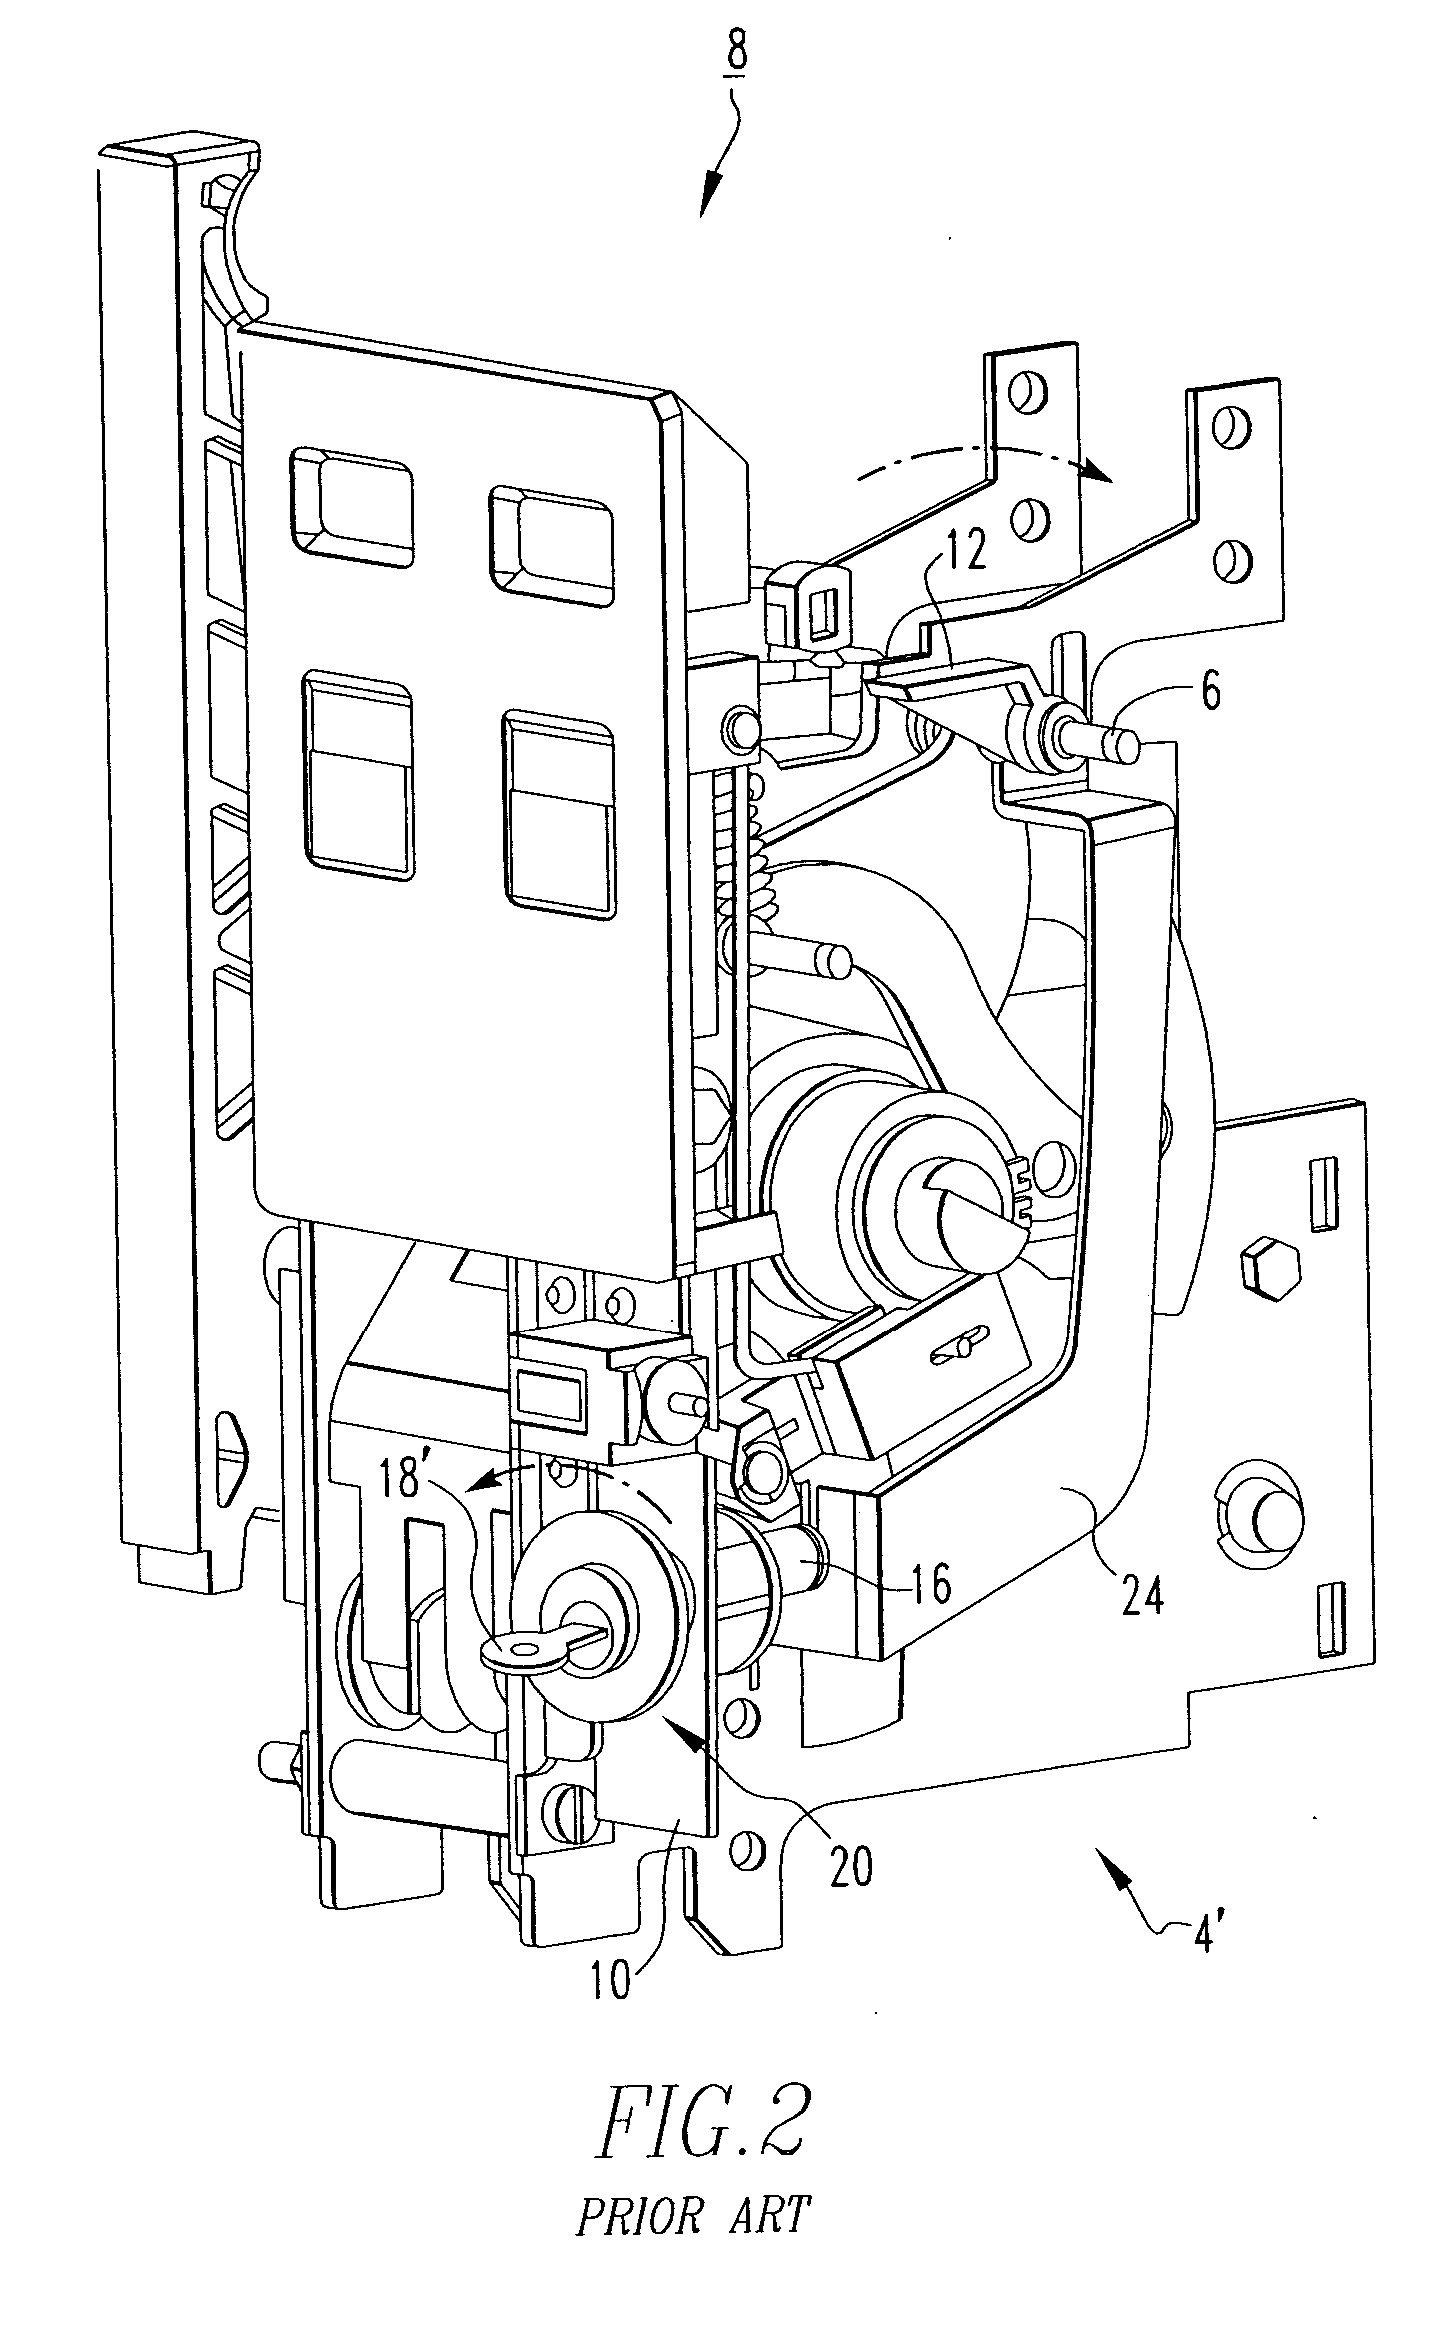 Trip component locking assembly and electrical switching apparatus employing the same